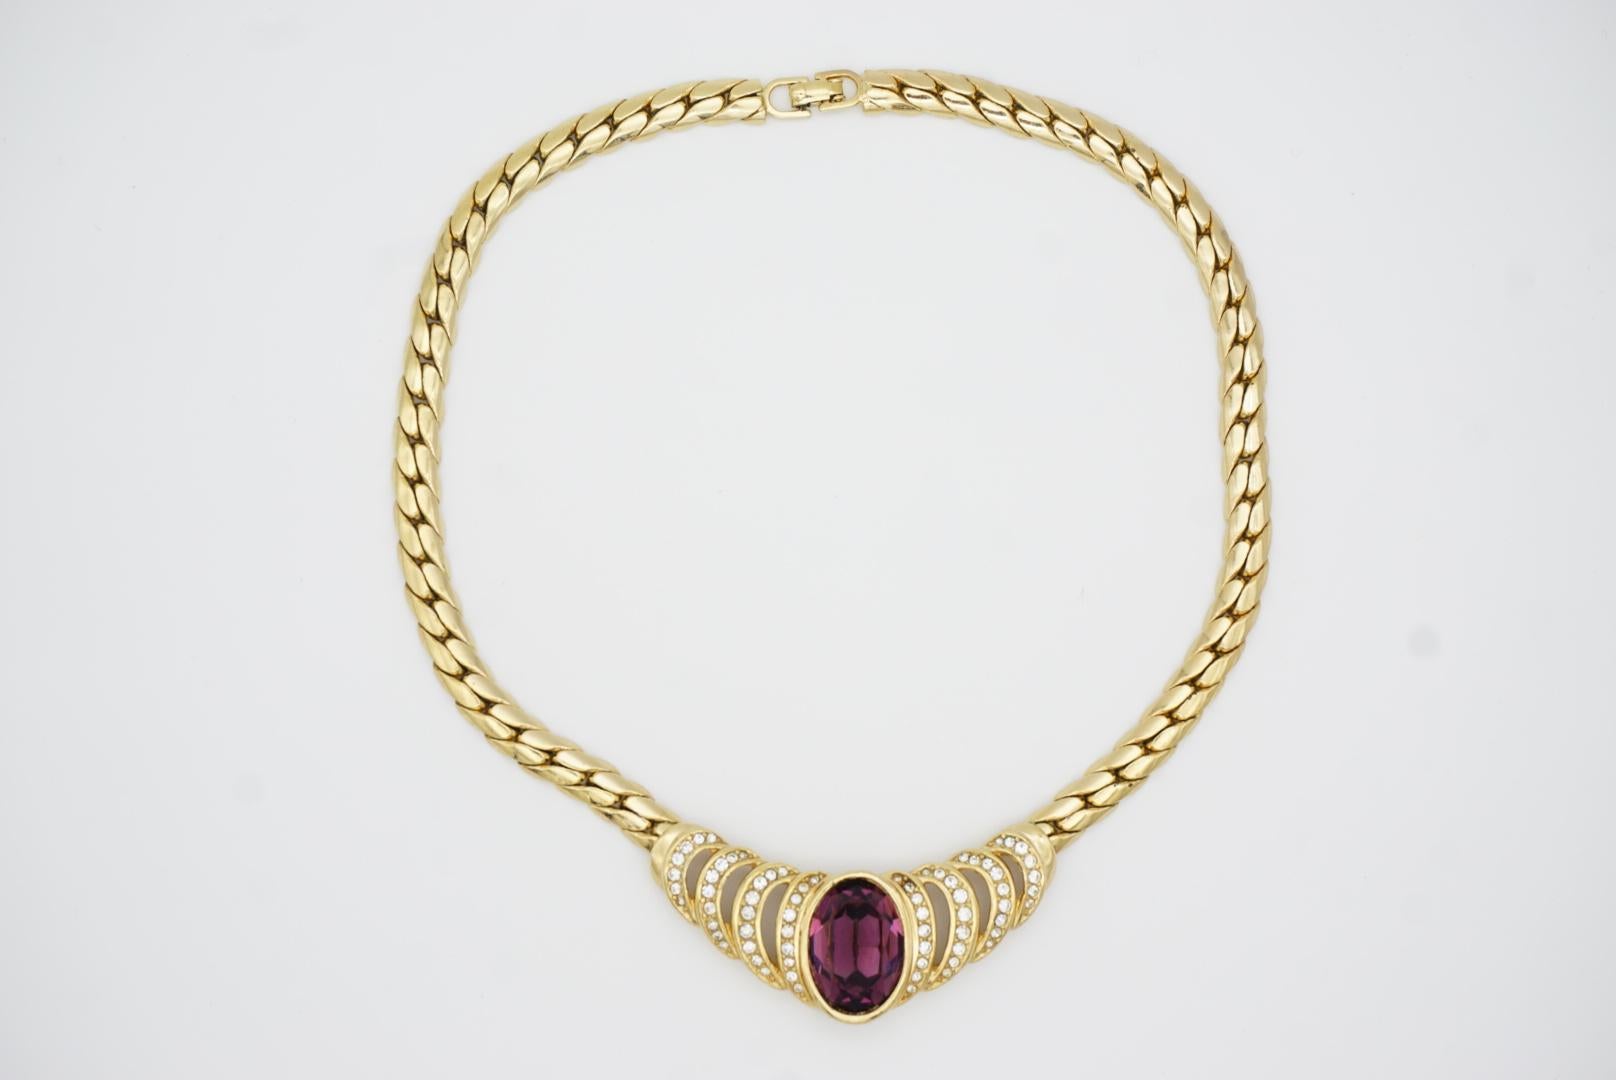 Christian Dior Vintage 1980s Large Oval Amethyst Crystals Gold Openwork Necklace For Sale 2